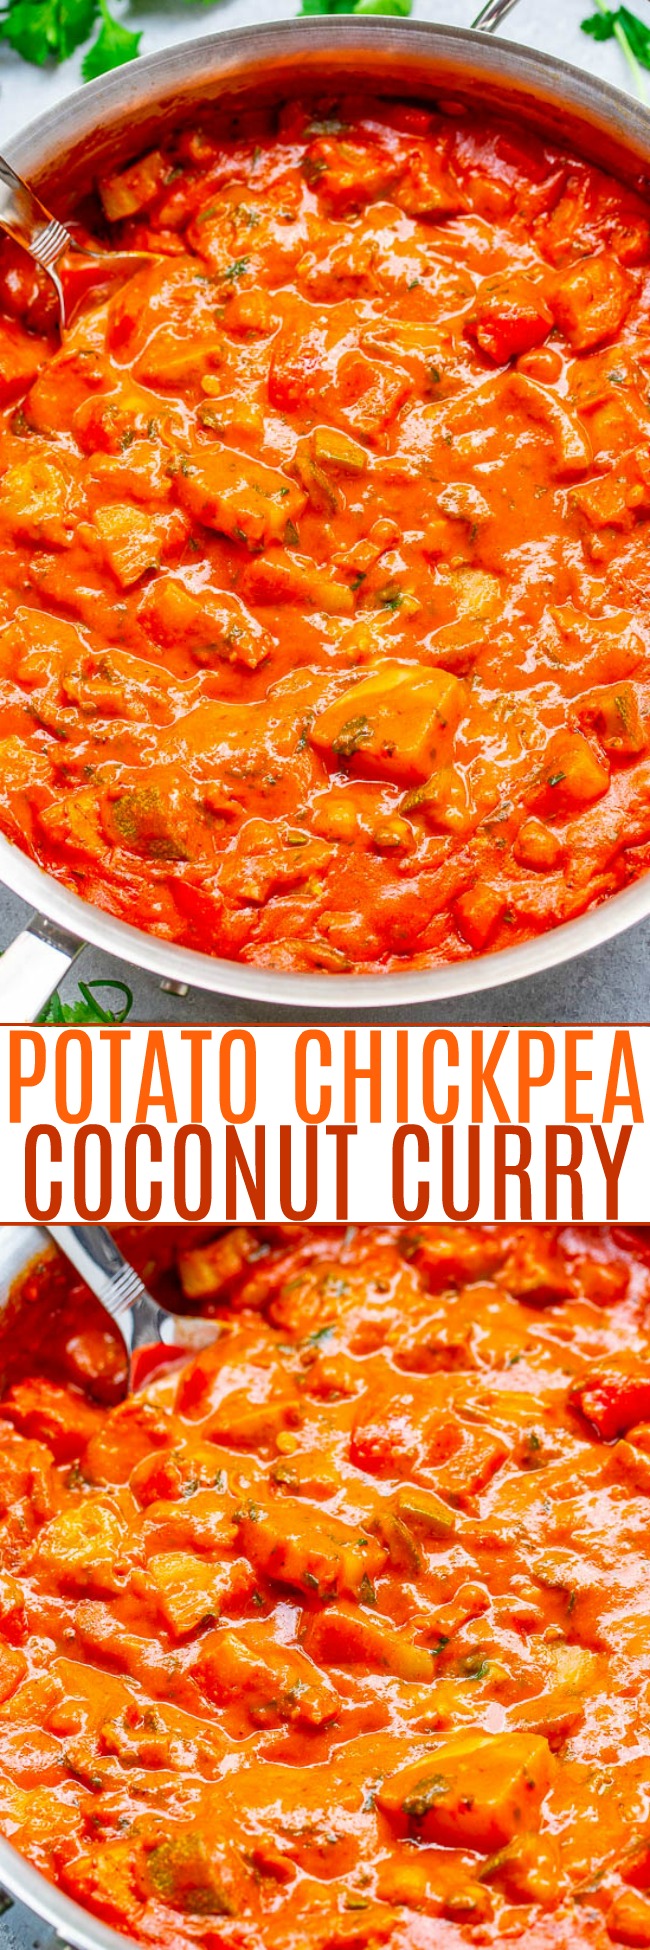 Chickpea and Potato Curry — This vegan, gluten-free curry is pure HEALTHY COMFORT FOOD with a fusion of Thai and Indian flavors!! Hearty, delicious, easy, ready in 30 minutes, and the leftovers freeze wonderfully!!